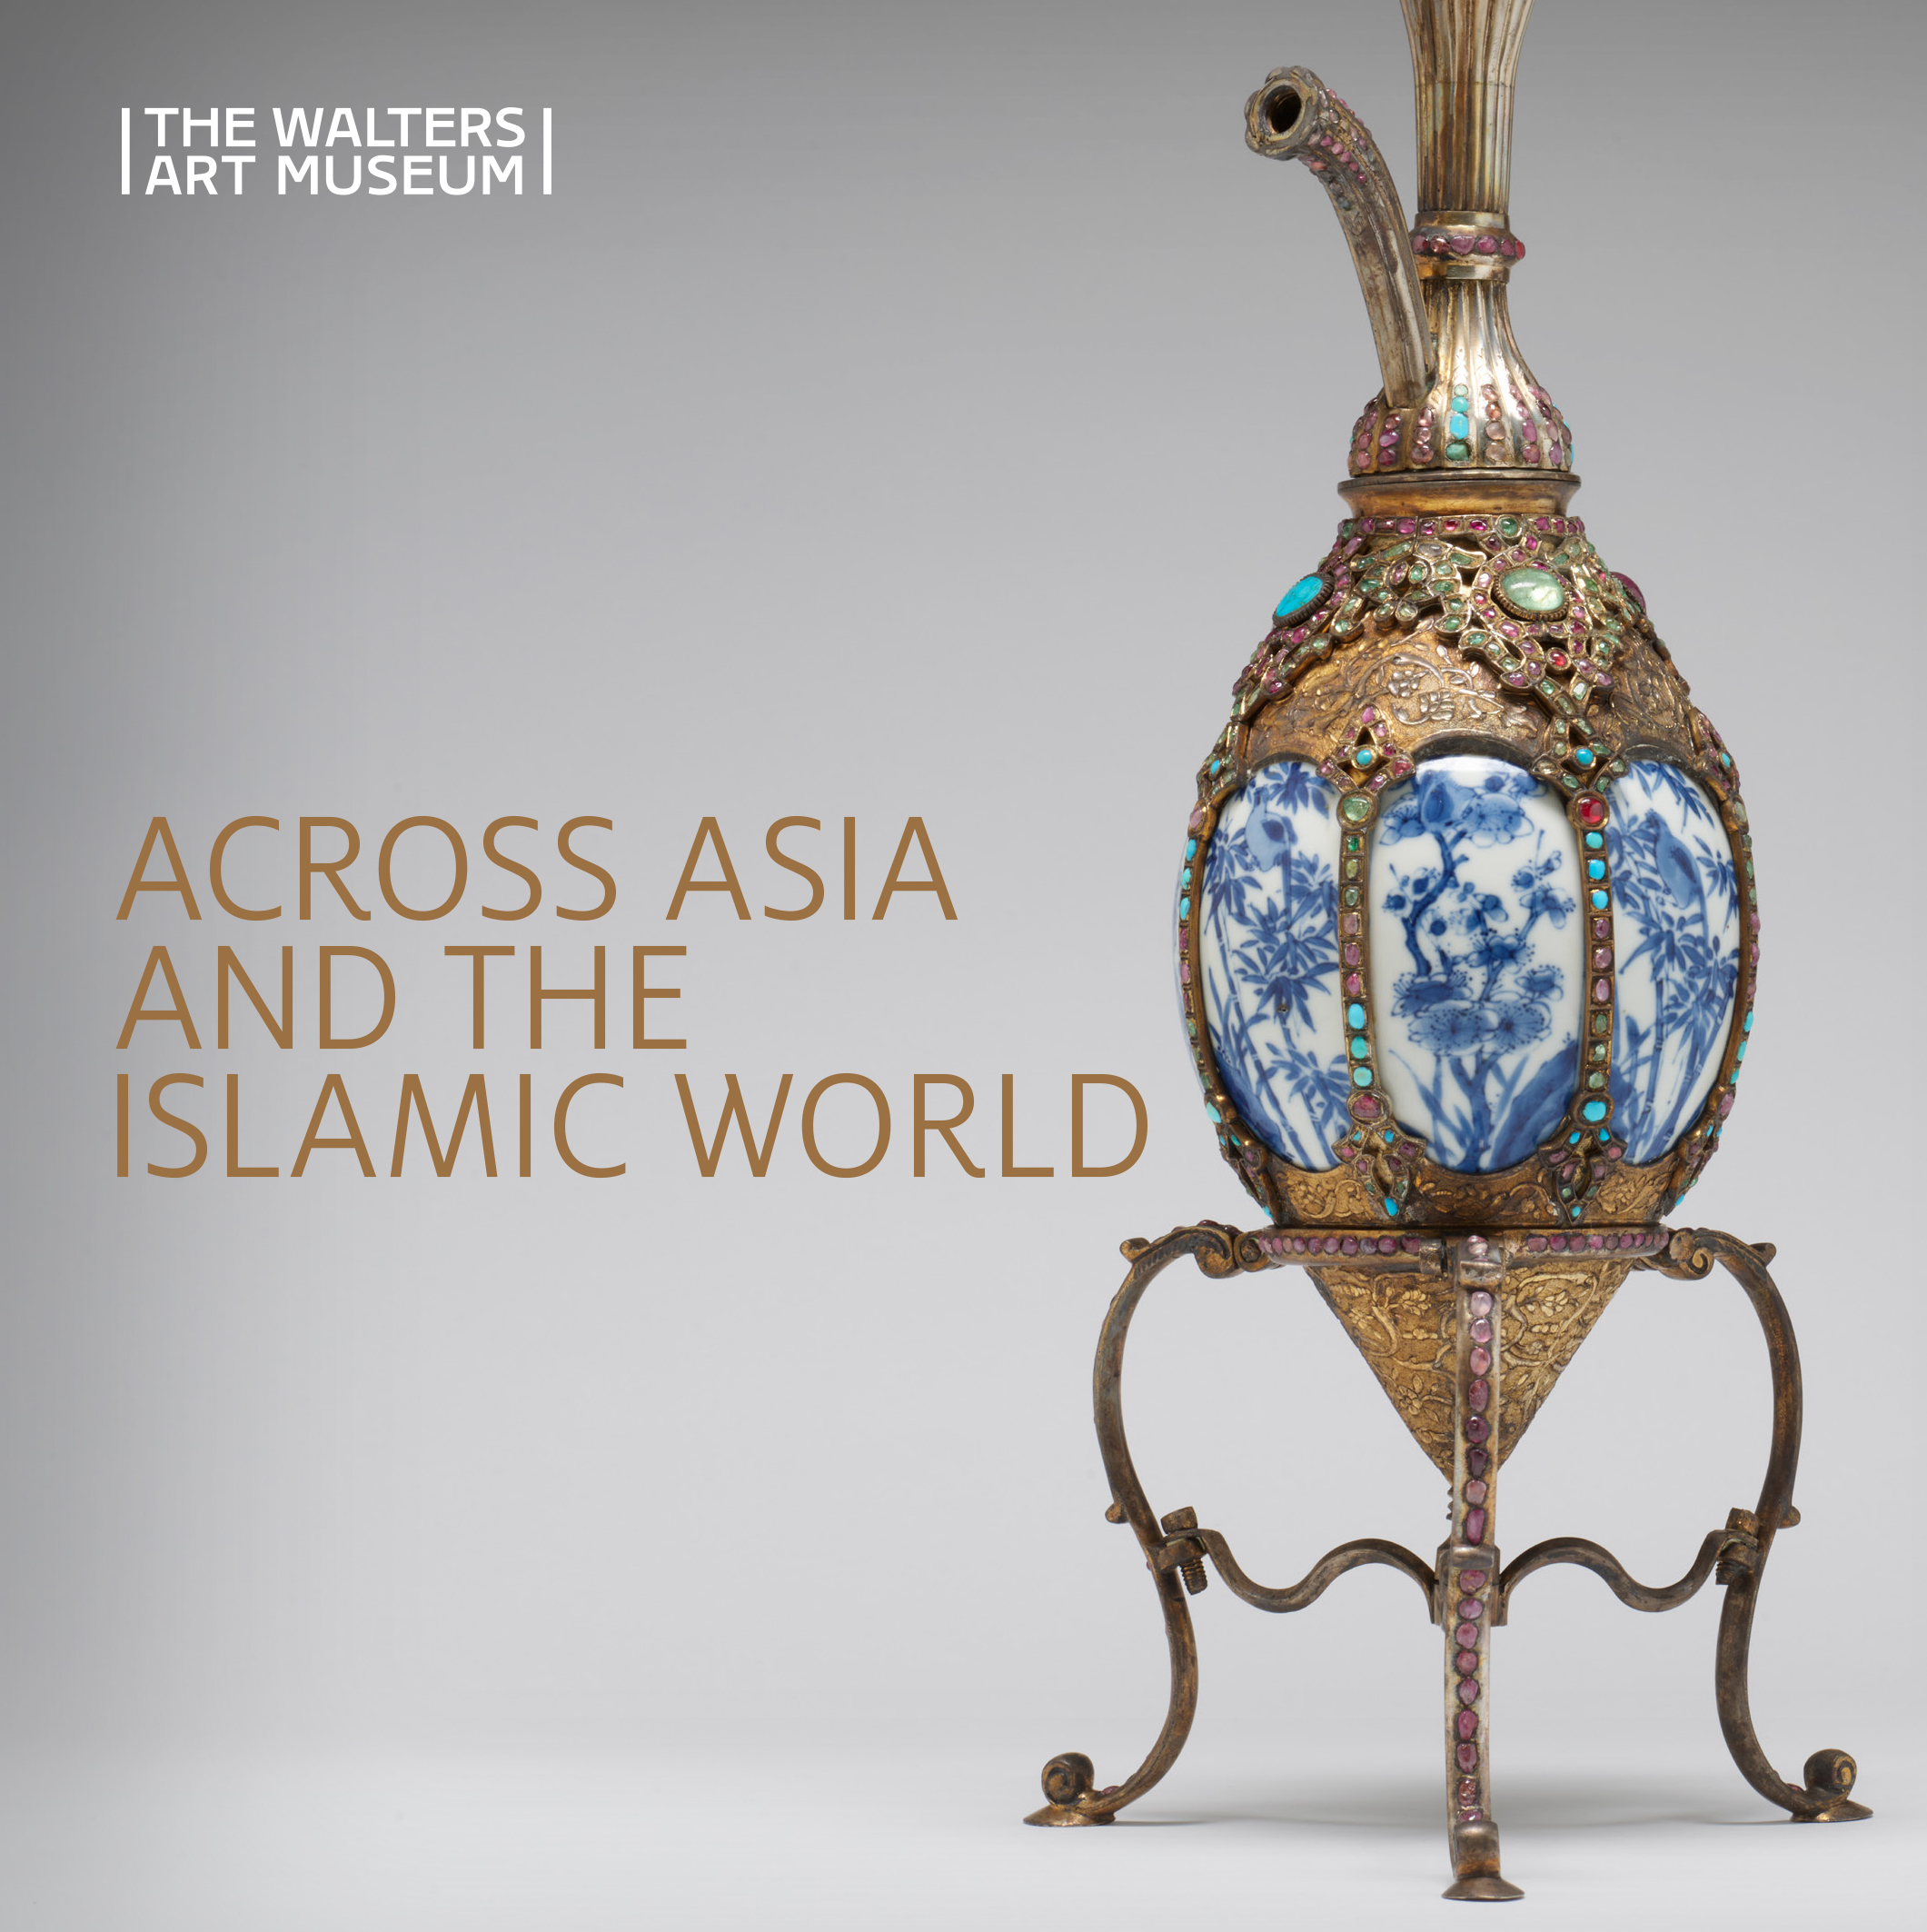 Detail image for Across Asia - Arts of Asia and the Islamic World